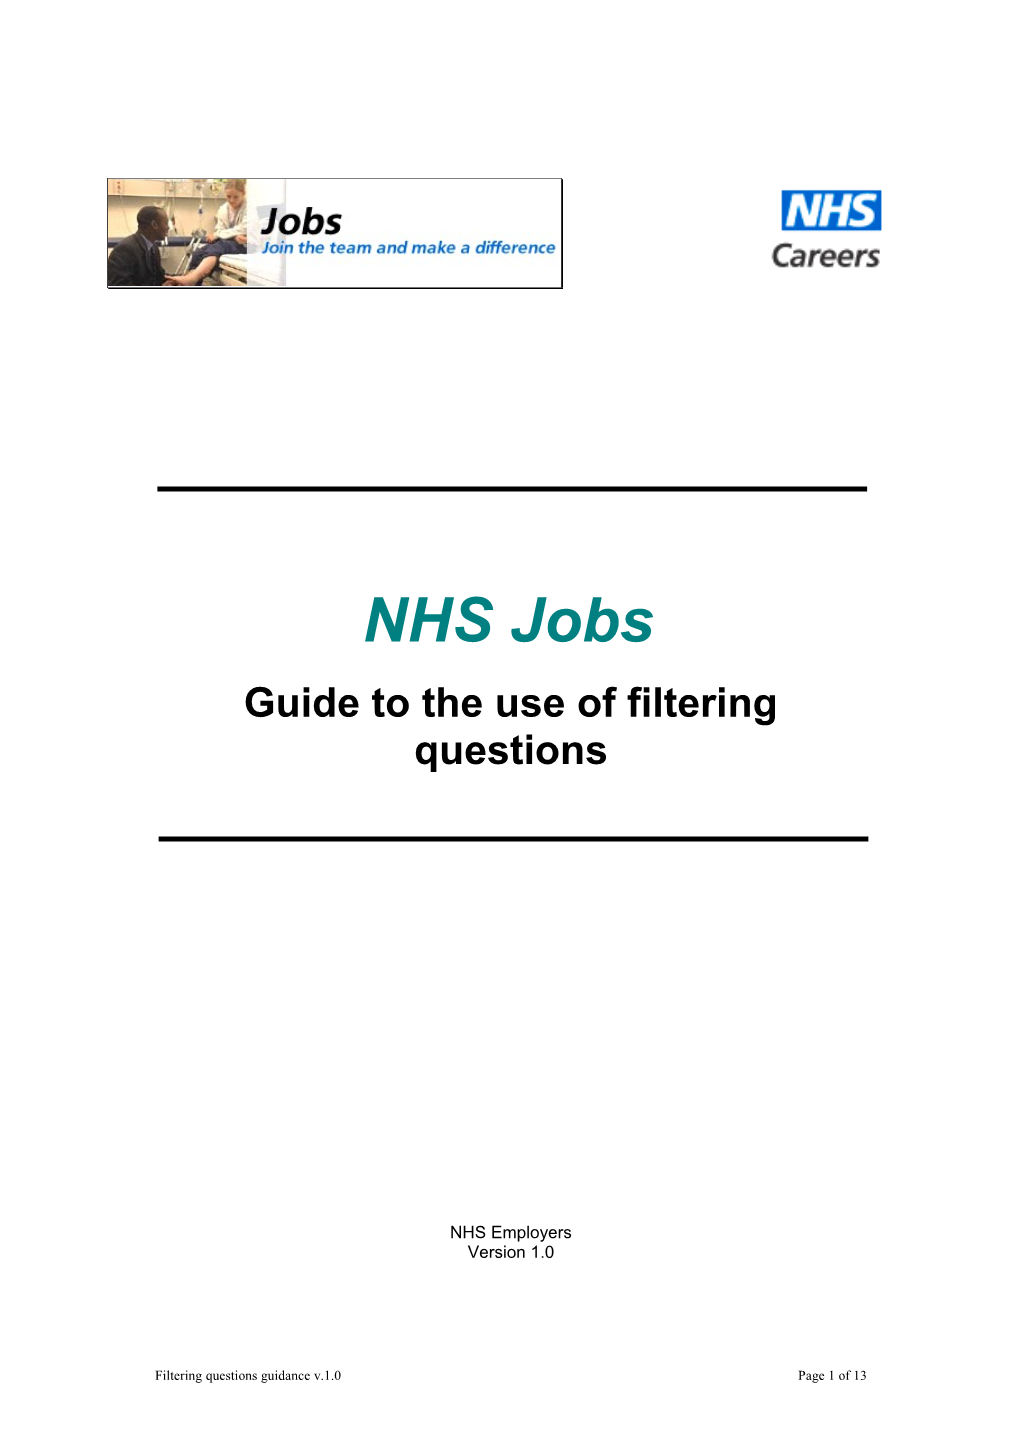 NHS Jobs Filtering Questions Guidance